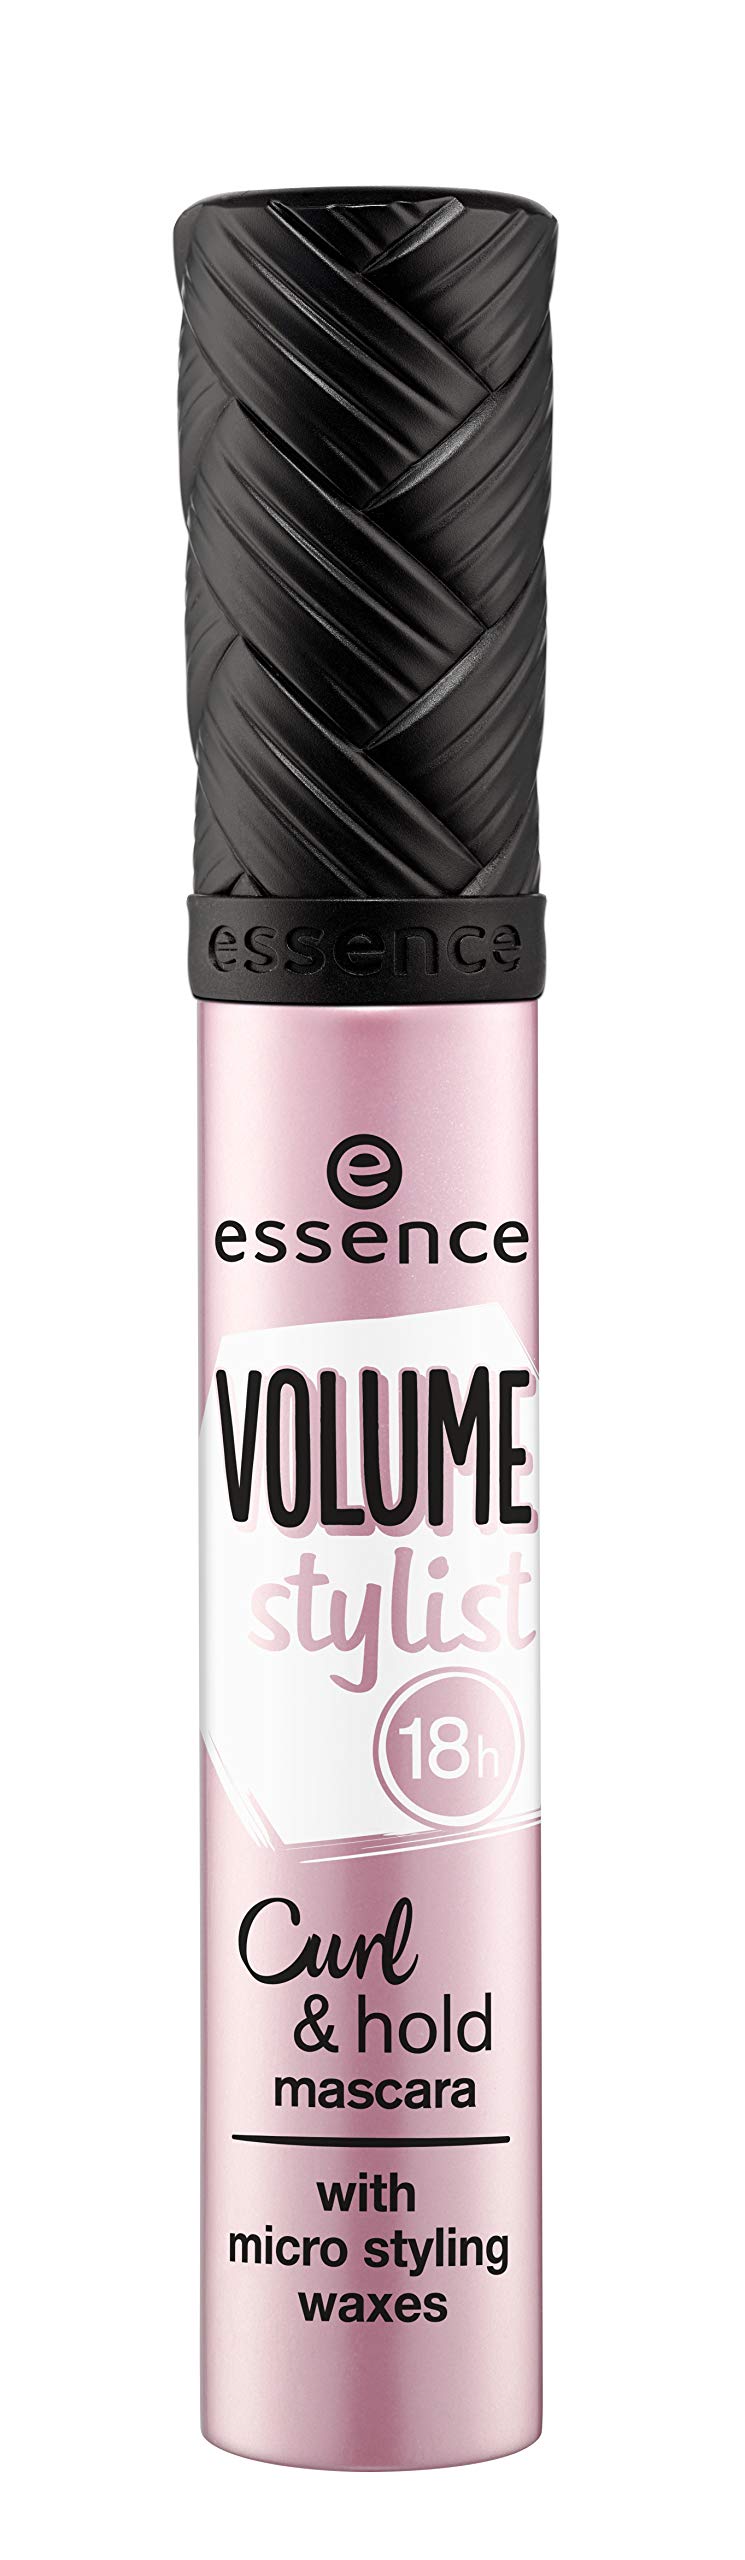 essence | Volume Stylist 18Hr Curl & Hold Mascara with Micro Styling Waxes | Cruelty Free - Black (Pack of 3) 3 Count (Pack of 1) - BeesActive Australia